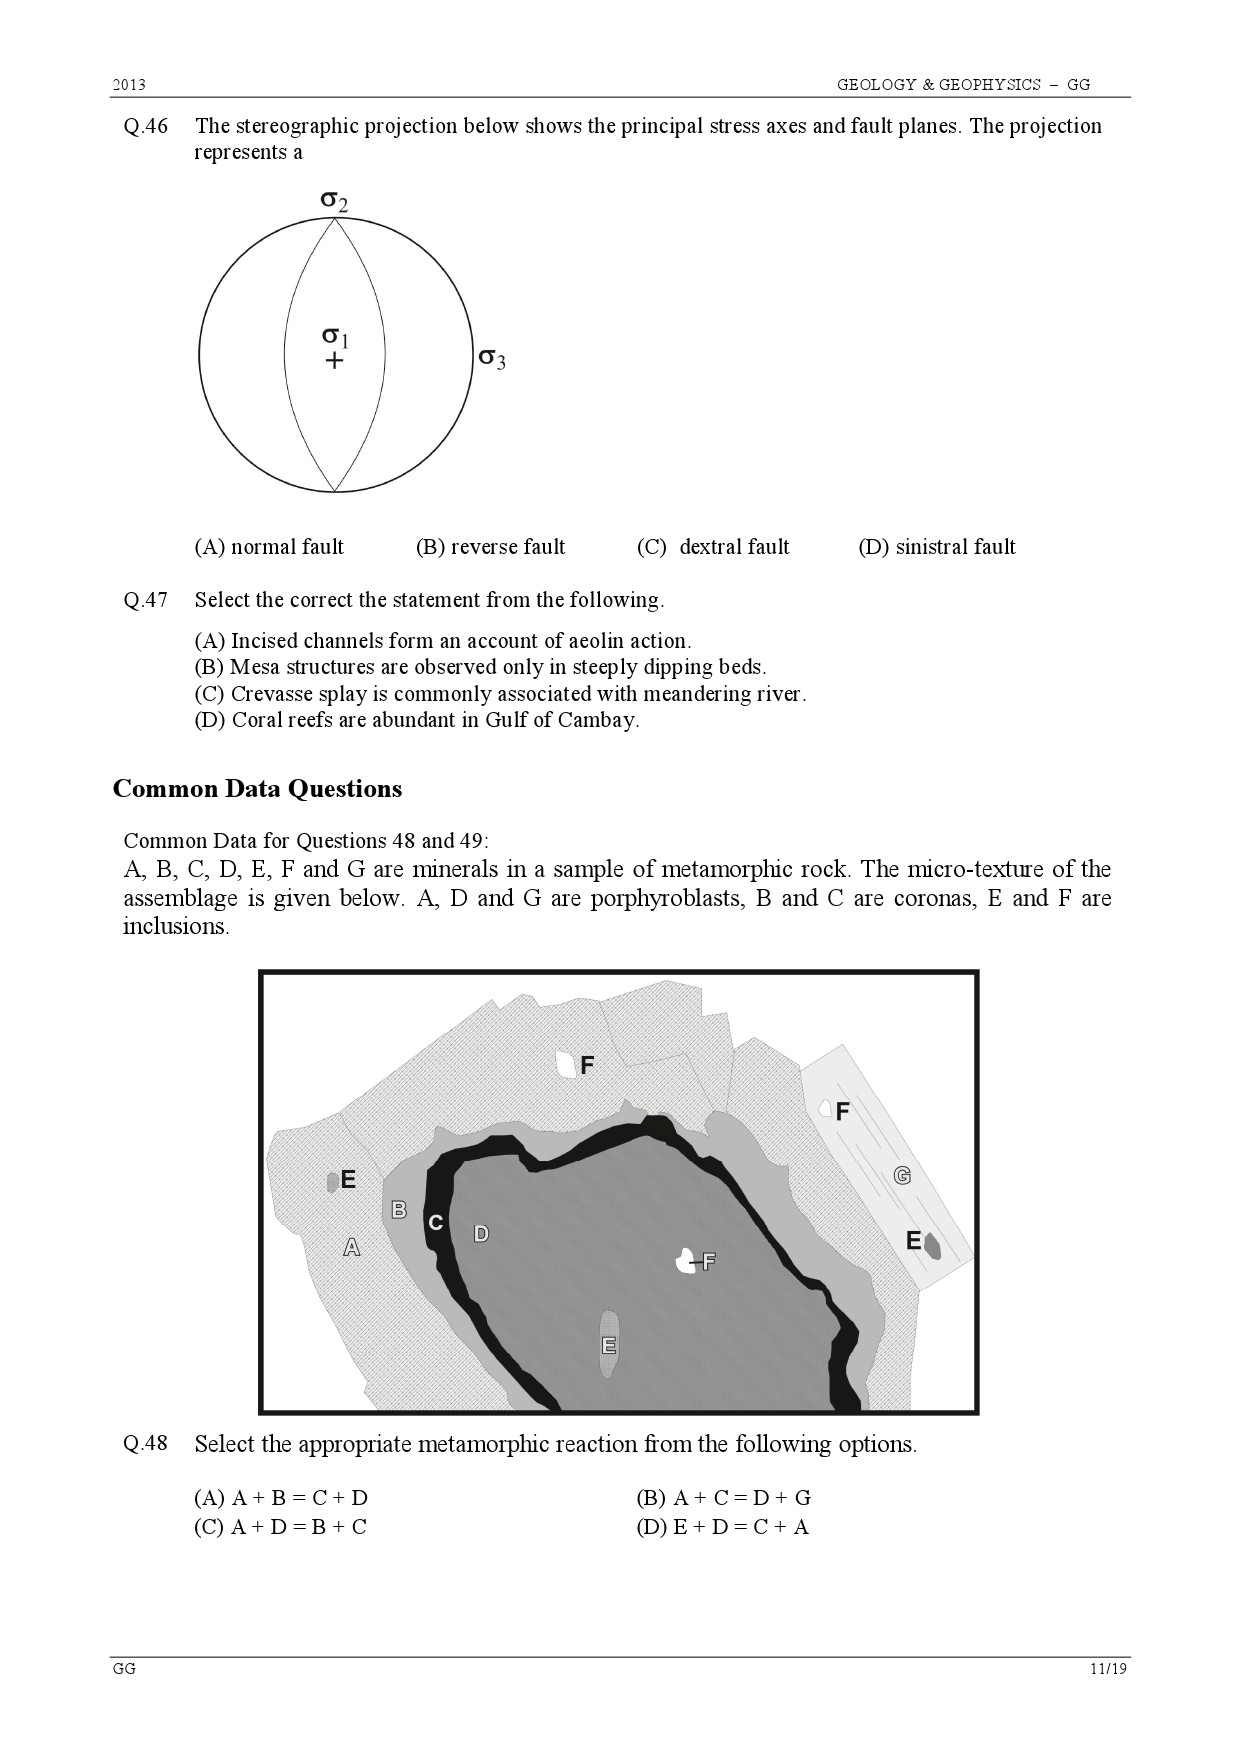 GATE Exam Question Paper 2013 Geology and Geophysics 11